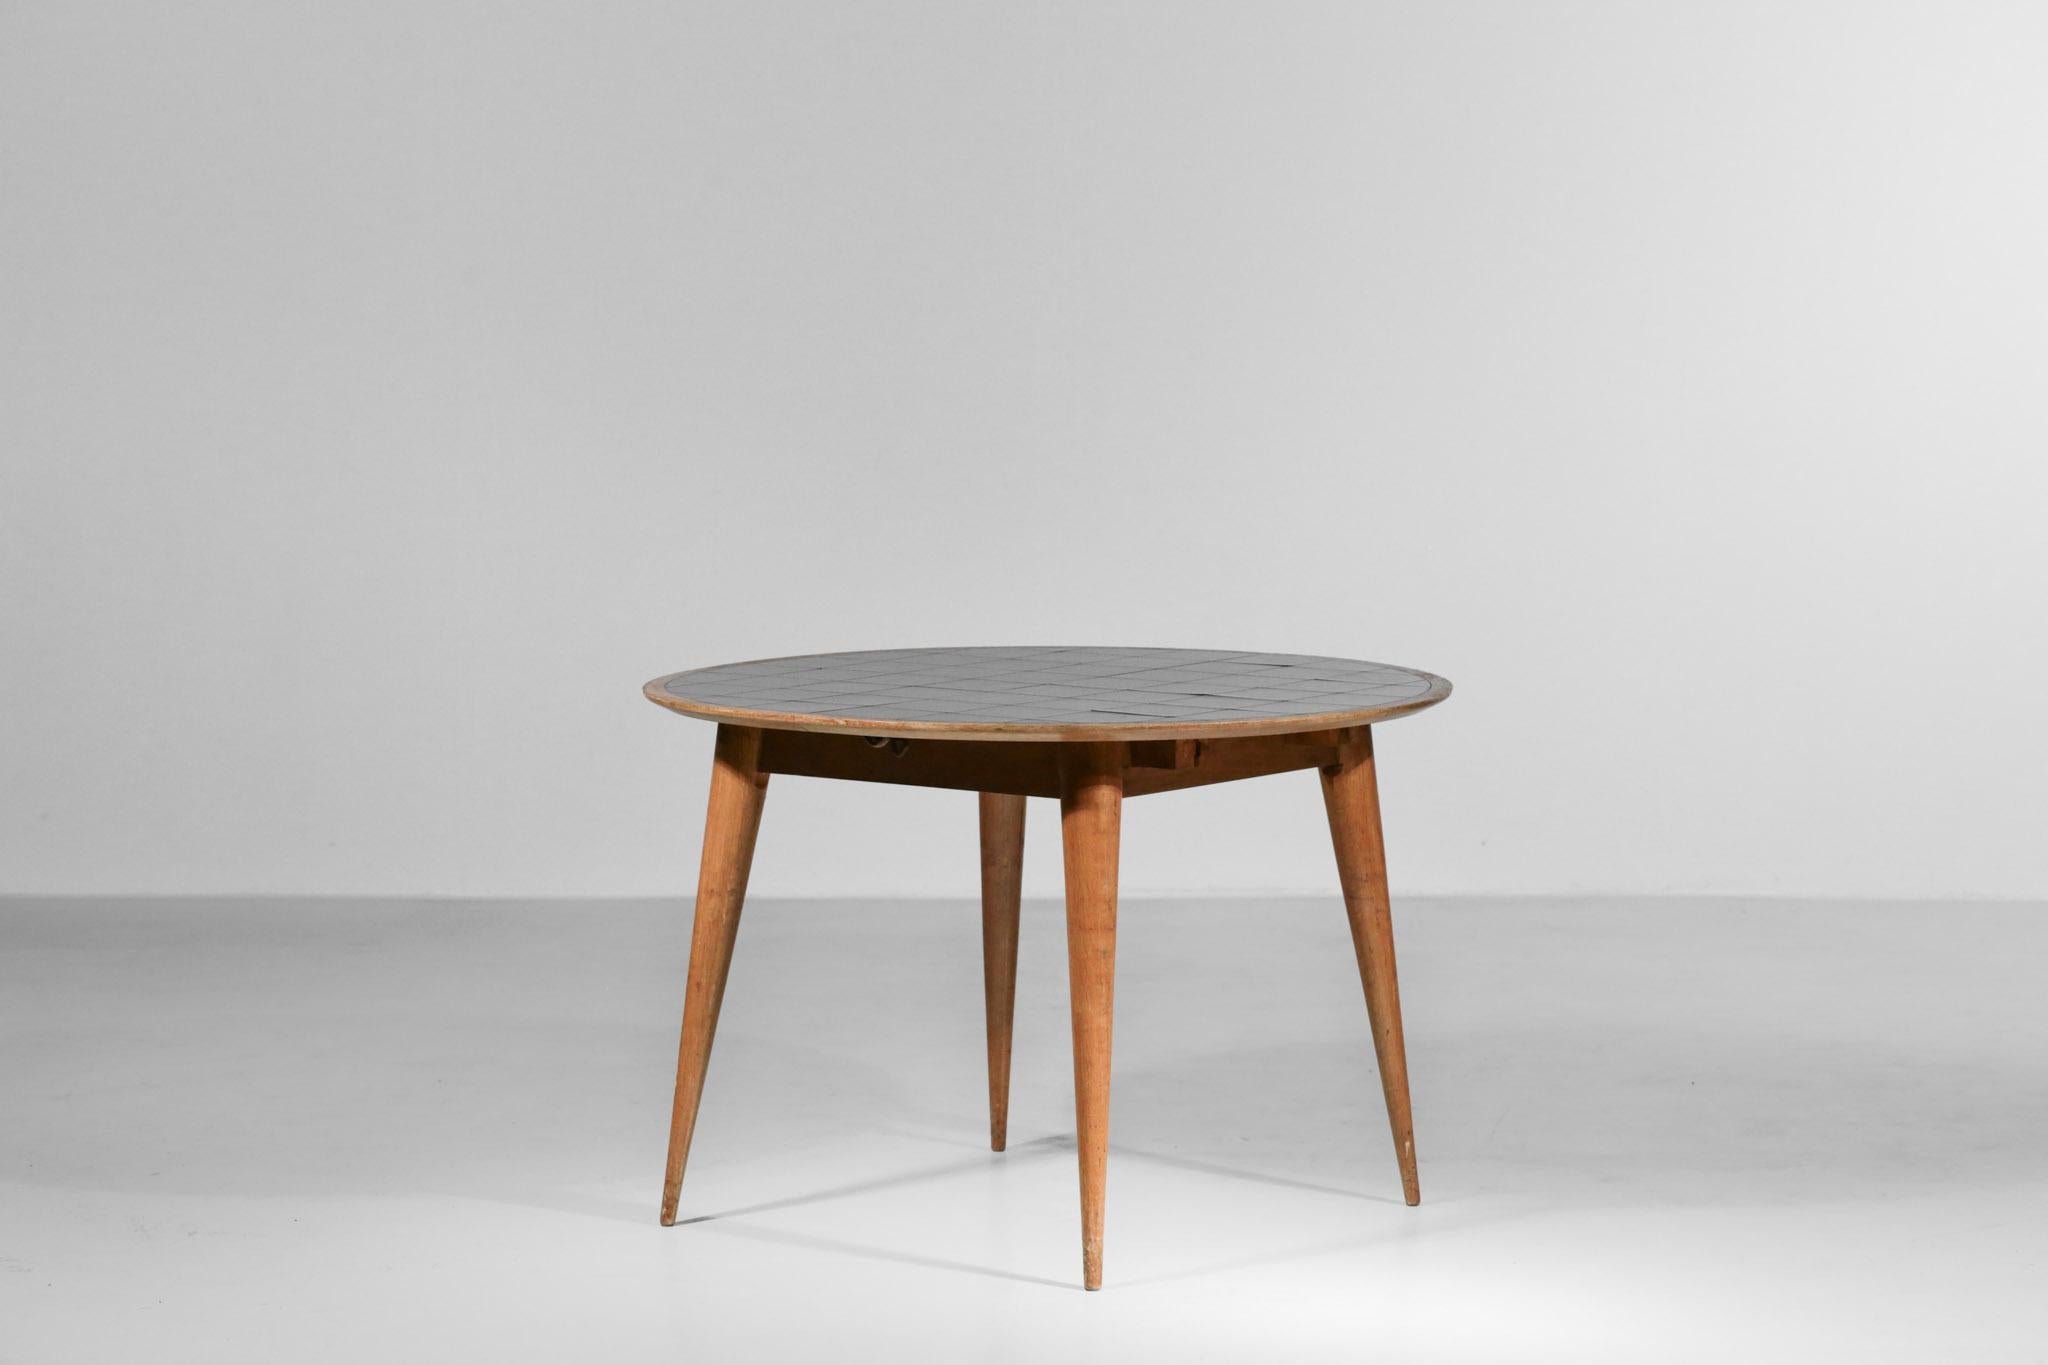 1950s dining table attributed to Francisque Chaleyssin. An extension available.